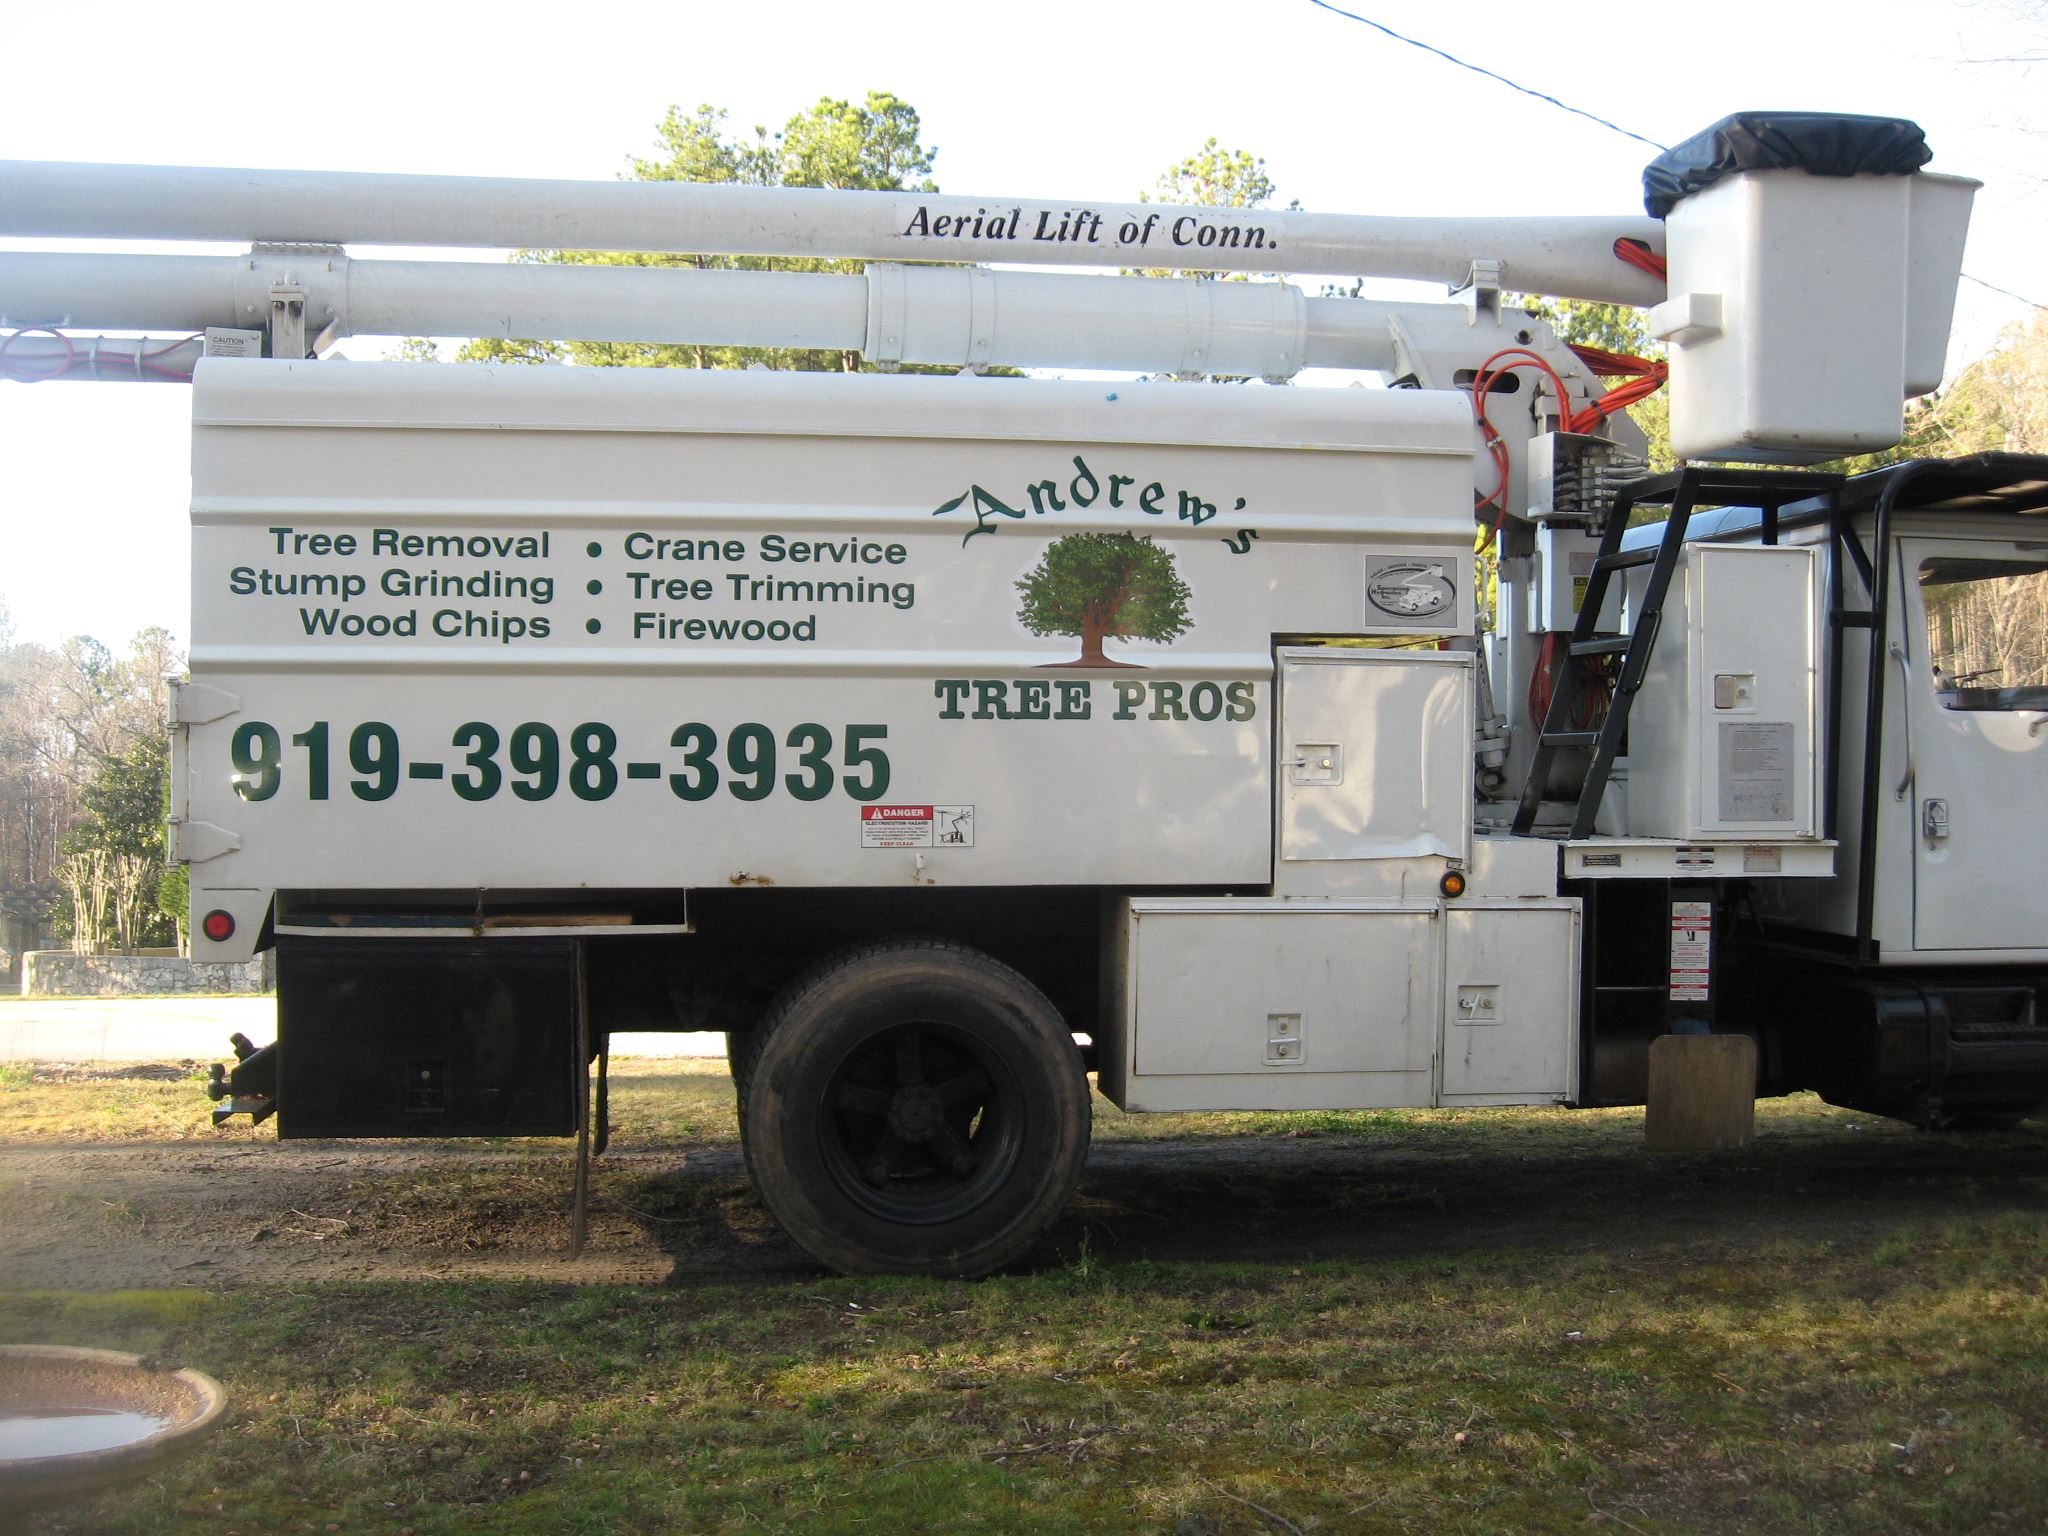 24 - 7 Emergency Tree and Crane Service for Raleigh, Durham, Wake Forest and surrounding areas.